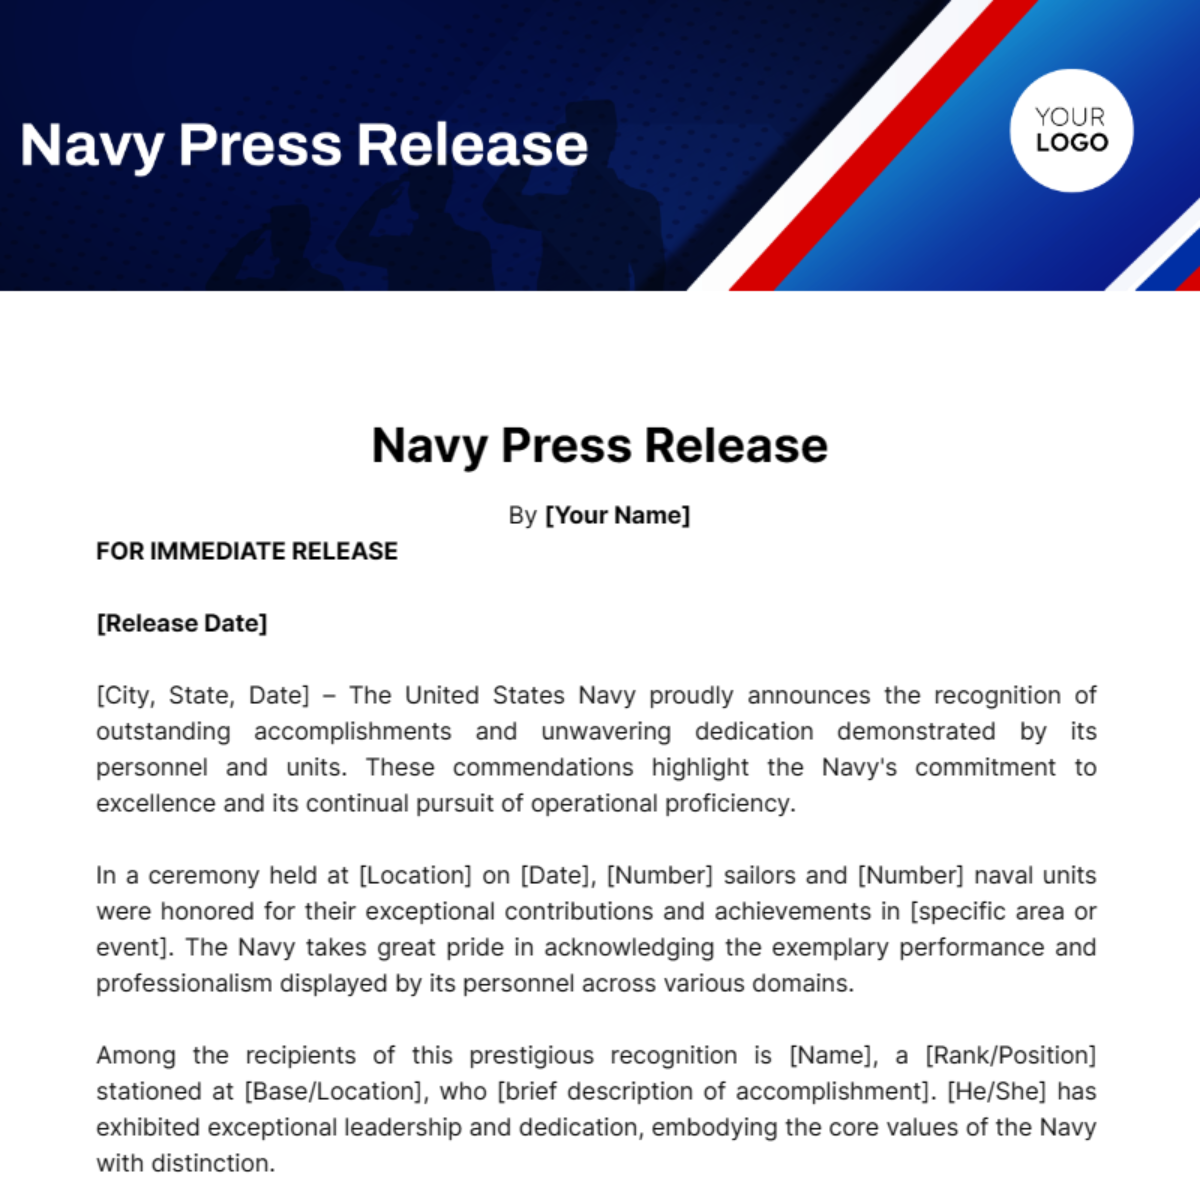 Navy Press Release Template